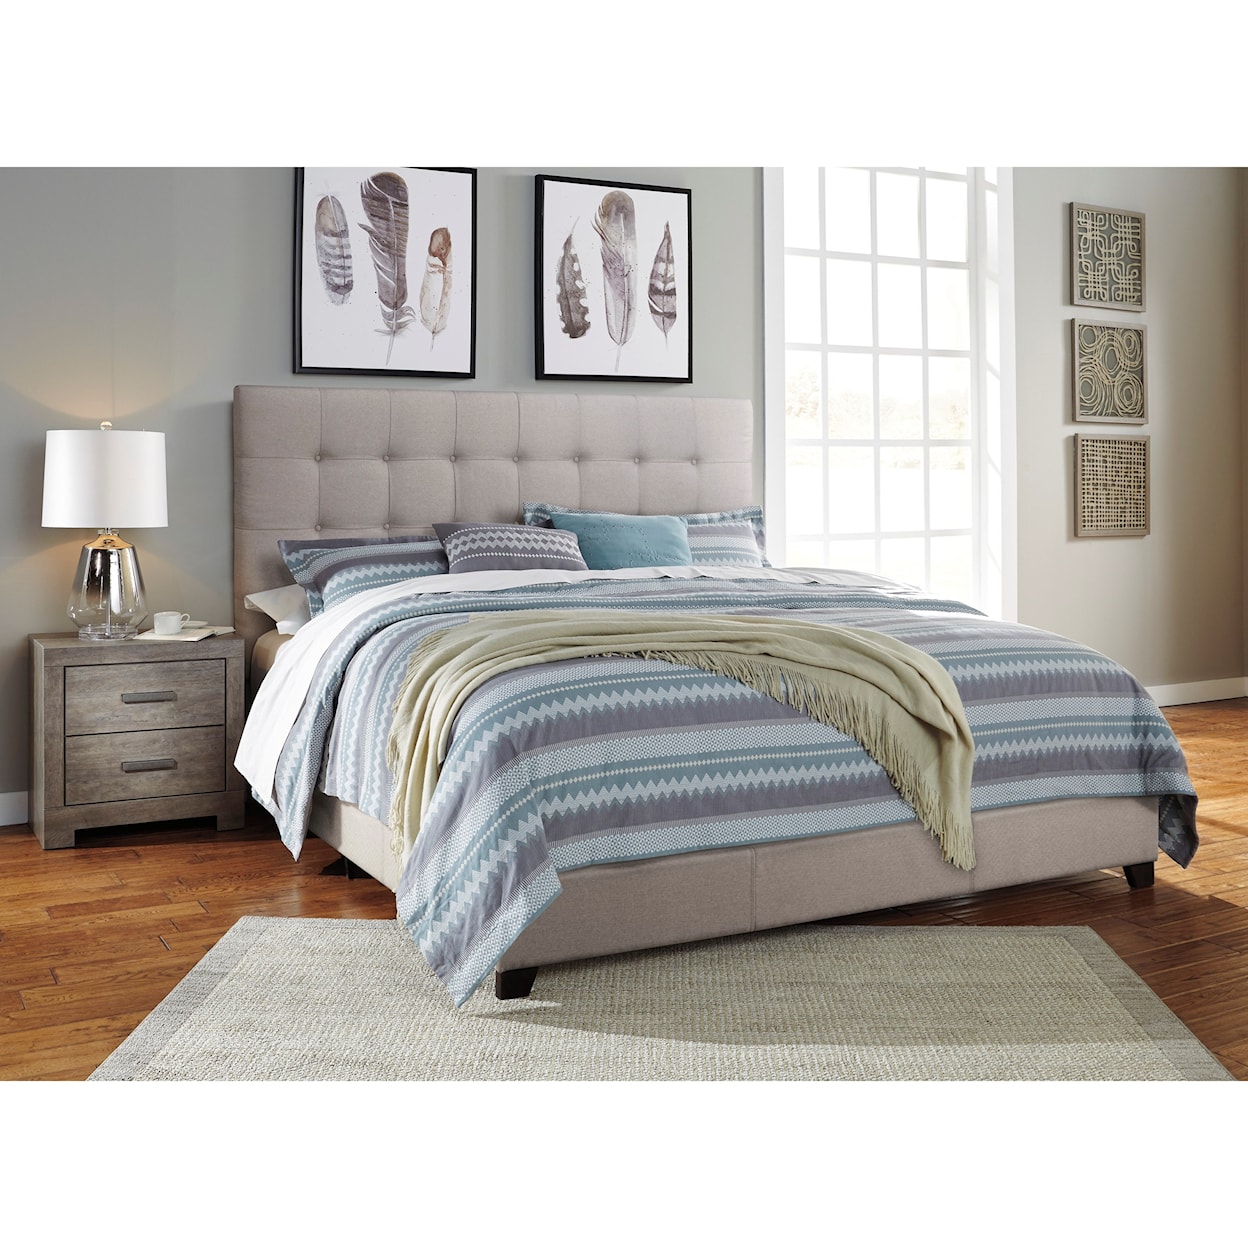 Ashley Contemporary Upholstered Beds King Upholstered Bed